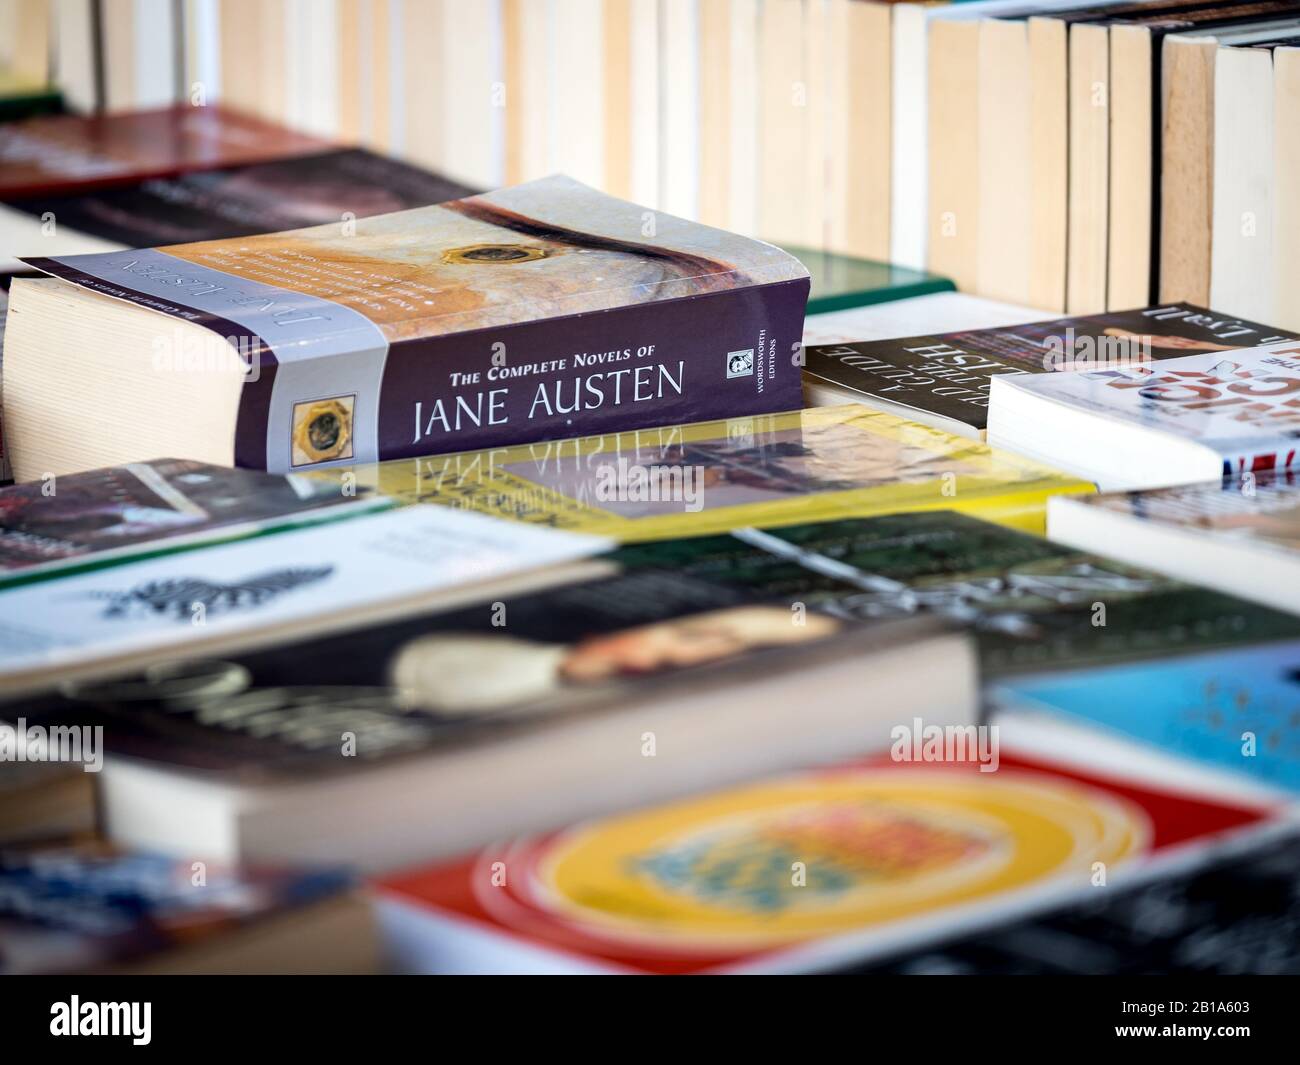 Second hand book stall. Full frame detail of a book sellers stall with focus on the complete works of Jane Austen. Stock Photo